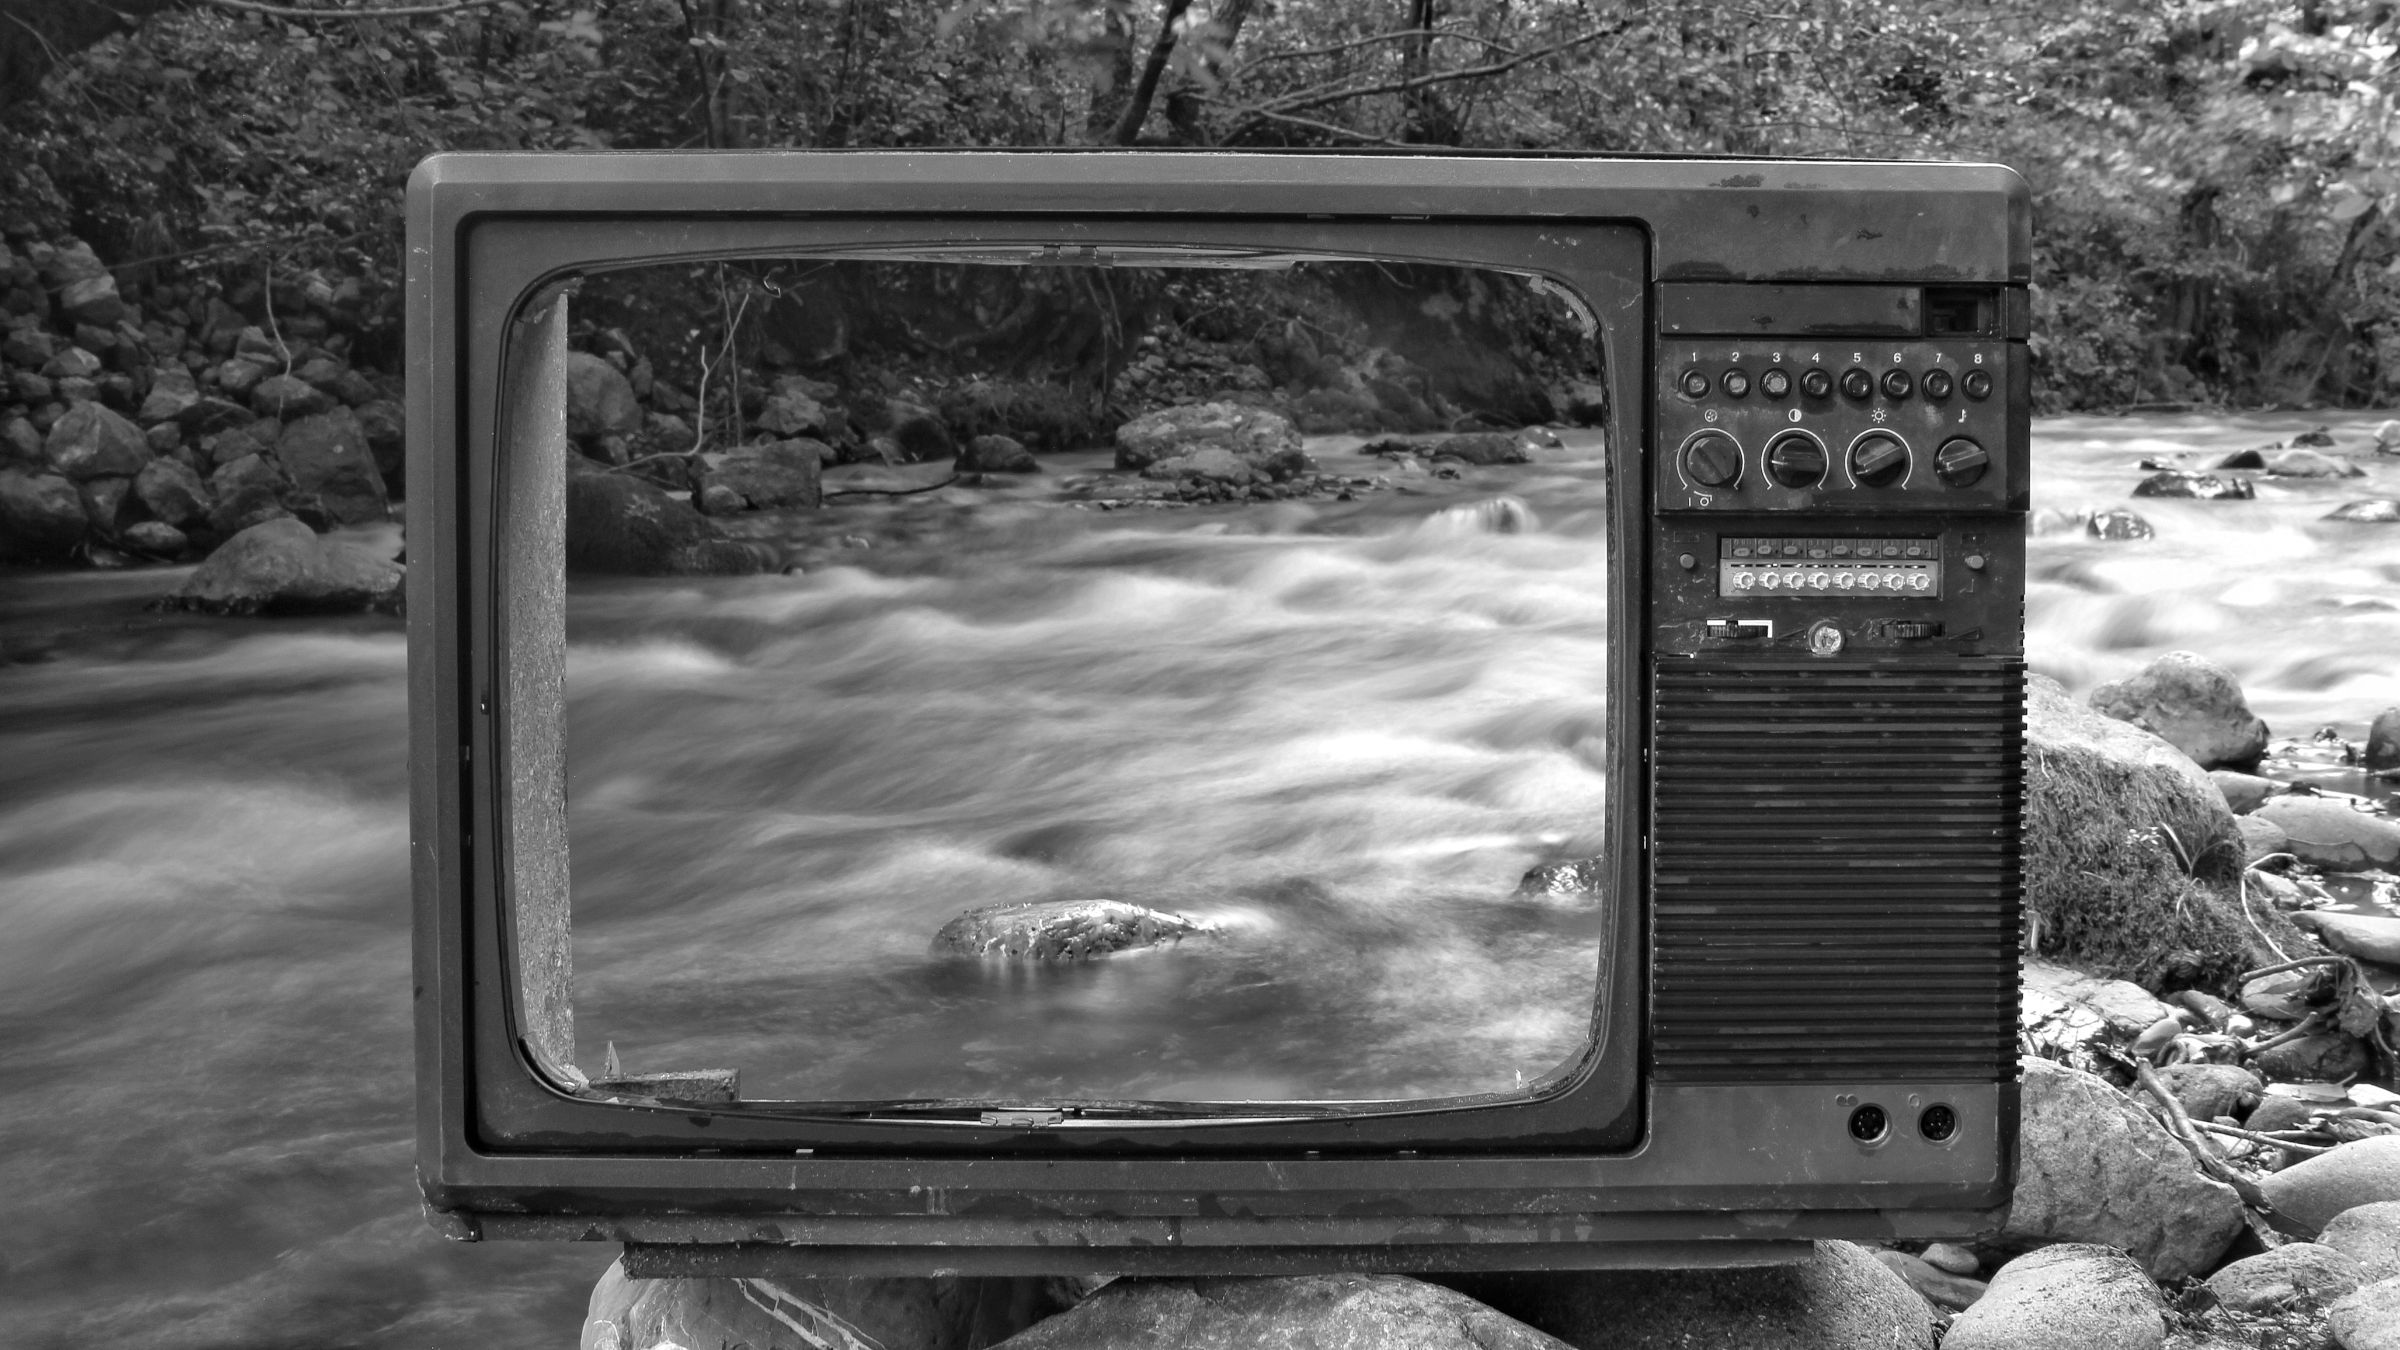 Television with a broken screen sitting on some rocks in a stream.